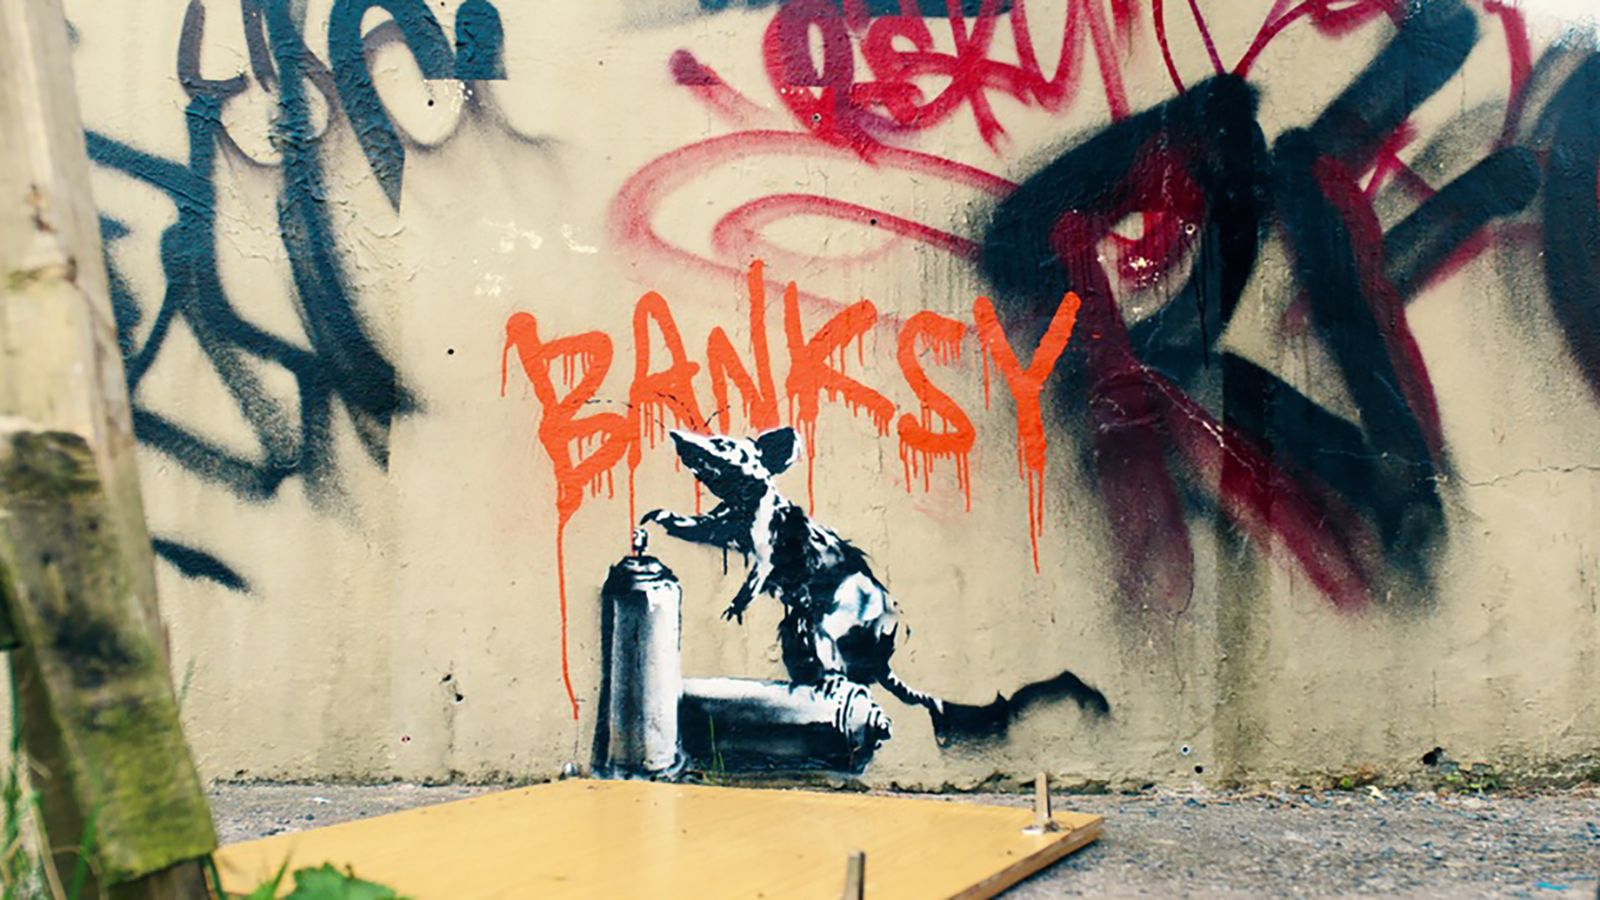 Christopher Walken Painted Over an Actual Banksy in BBC's The Outlaws